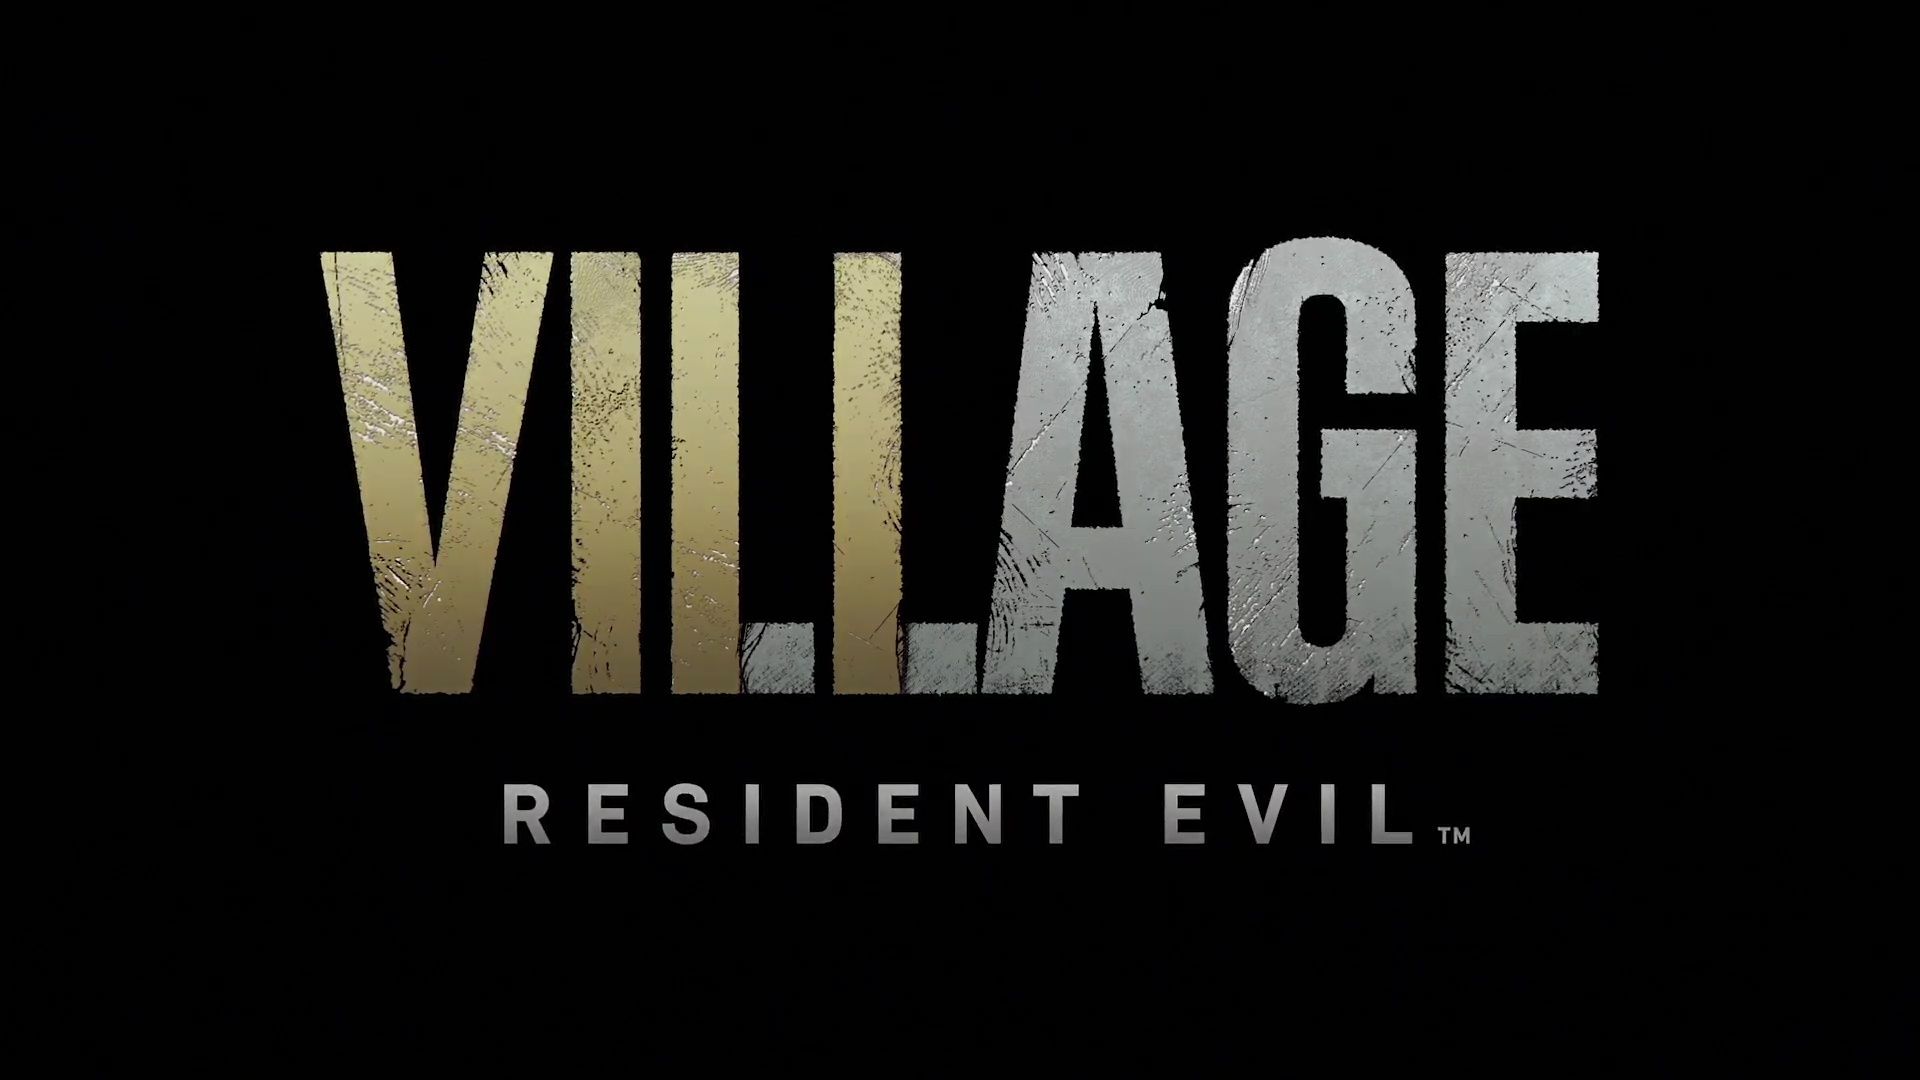 Resident Evil: Village' is coming to the PS5 in 2021